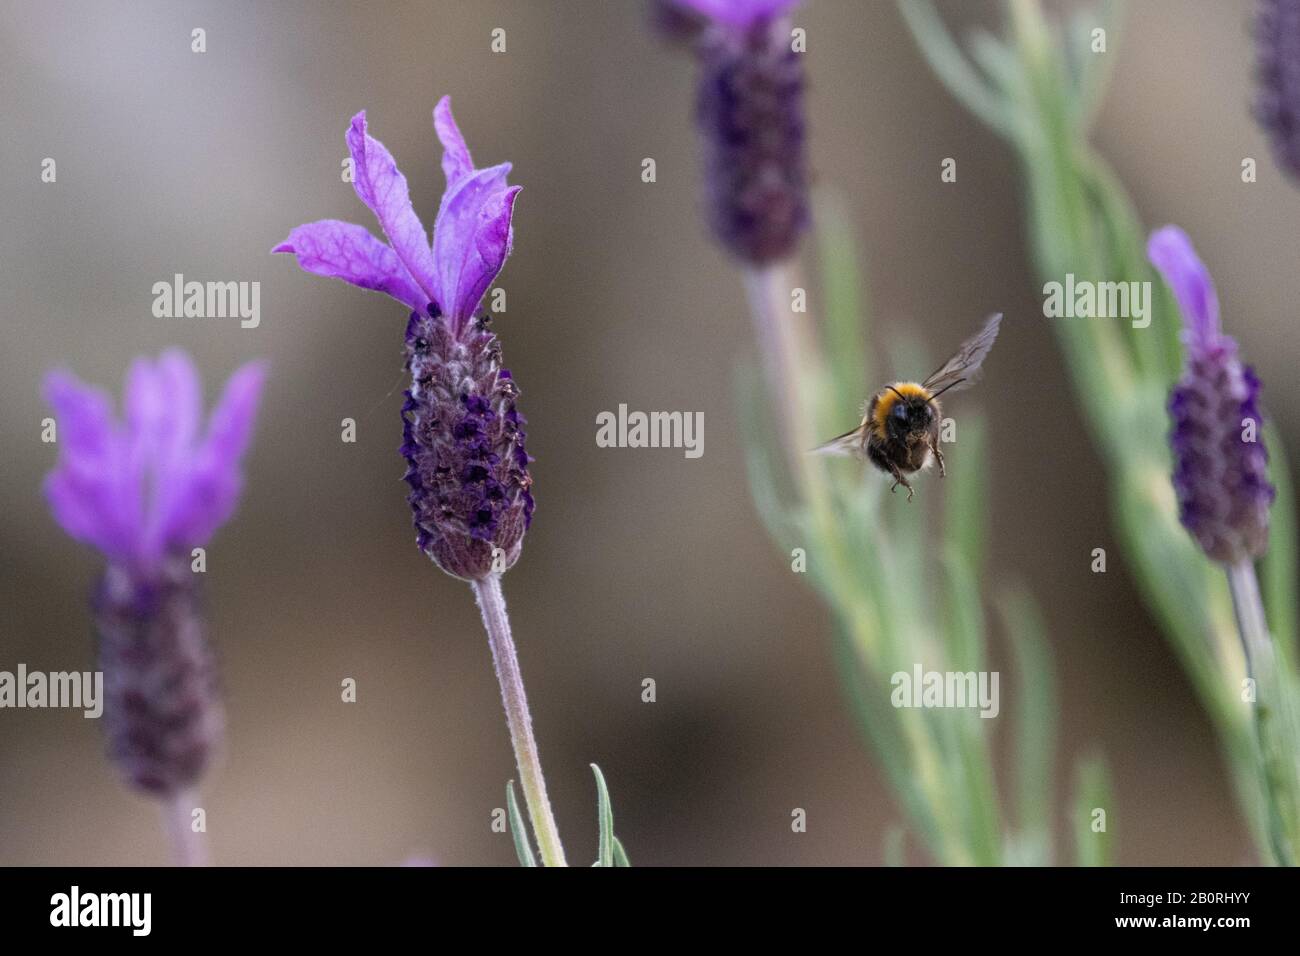 A bee in flight through a patch of vibrant purple lavender flowers Stock Photo